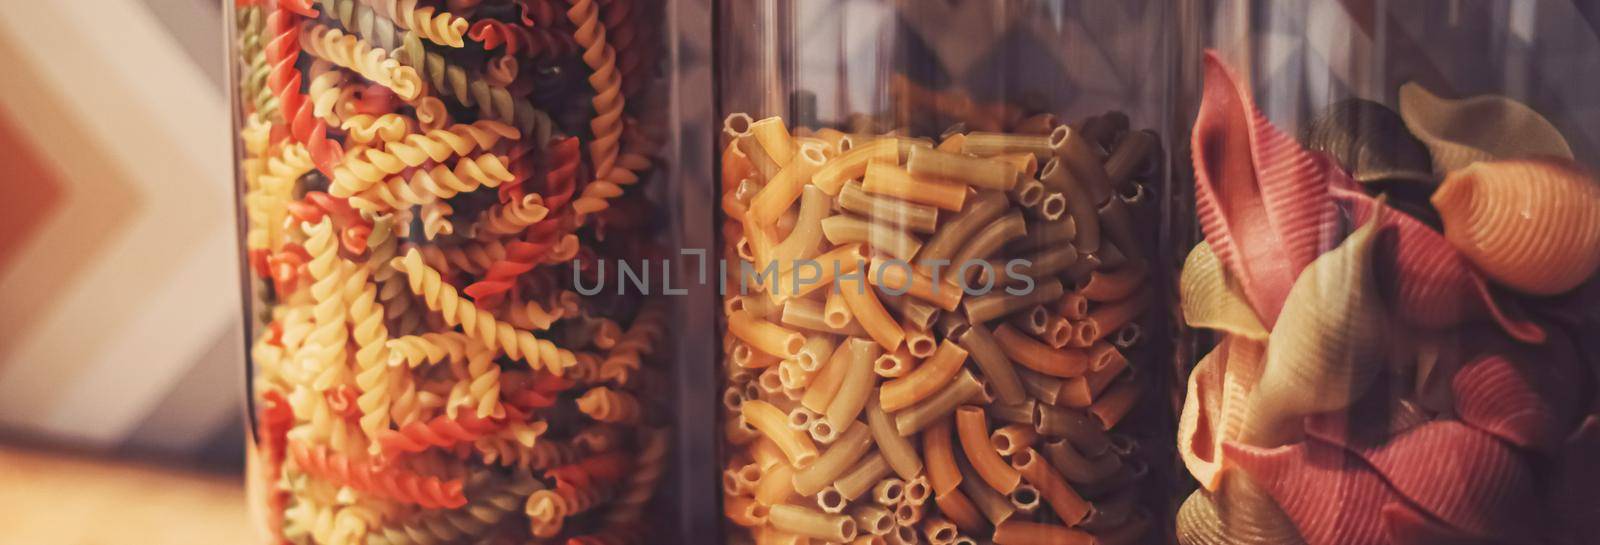 Pasta in dry food storage containers in the kitchen, pantry organisation and home decor by Anneleven